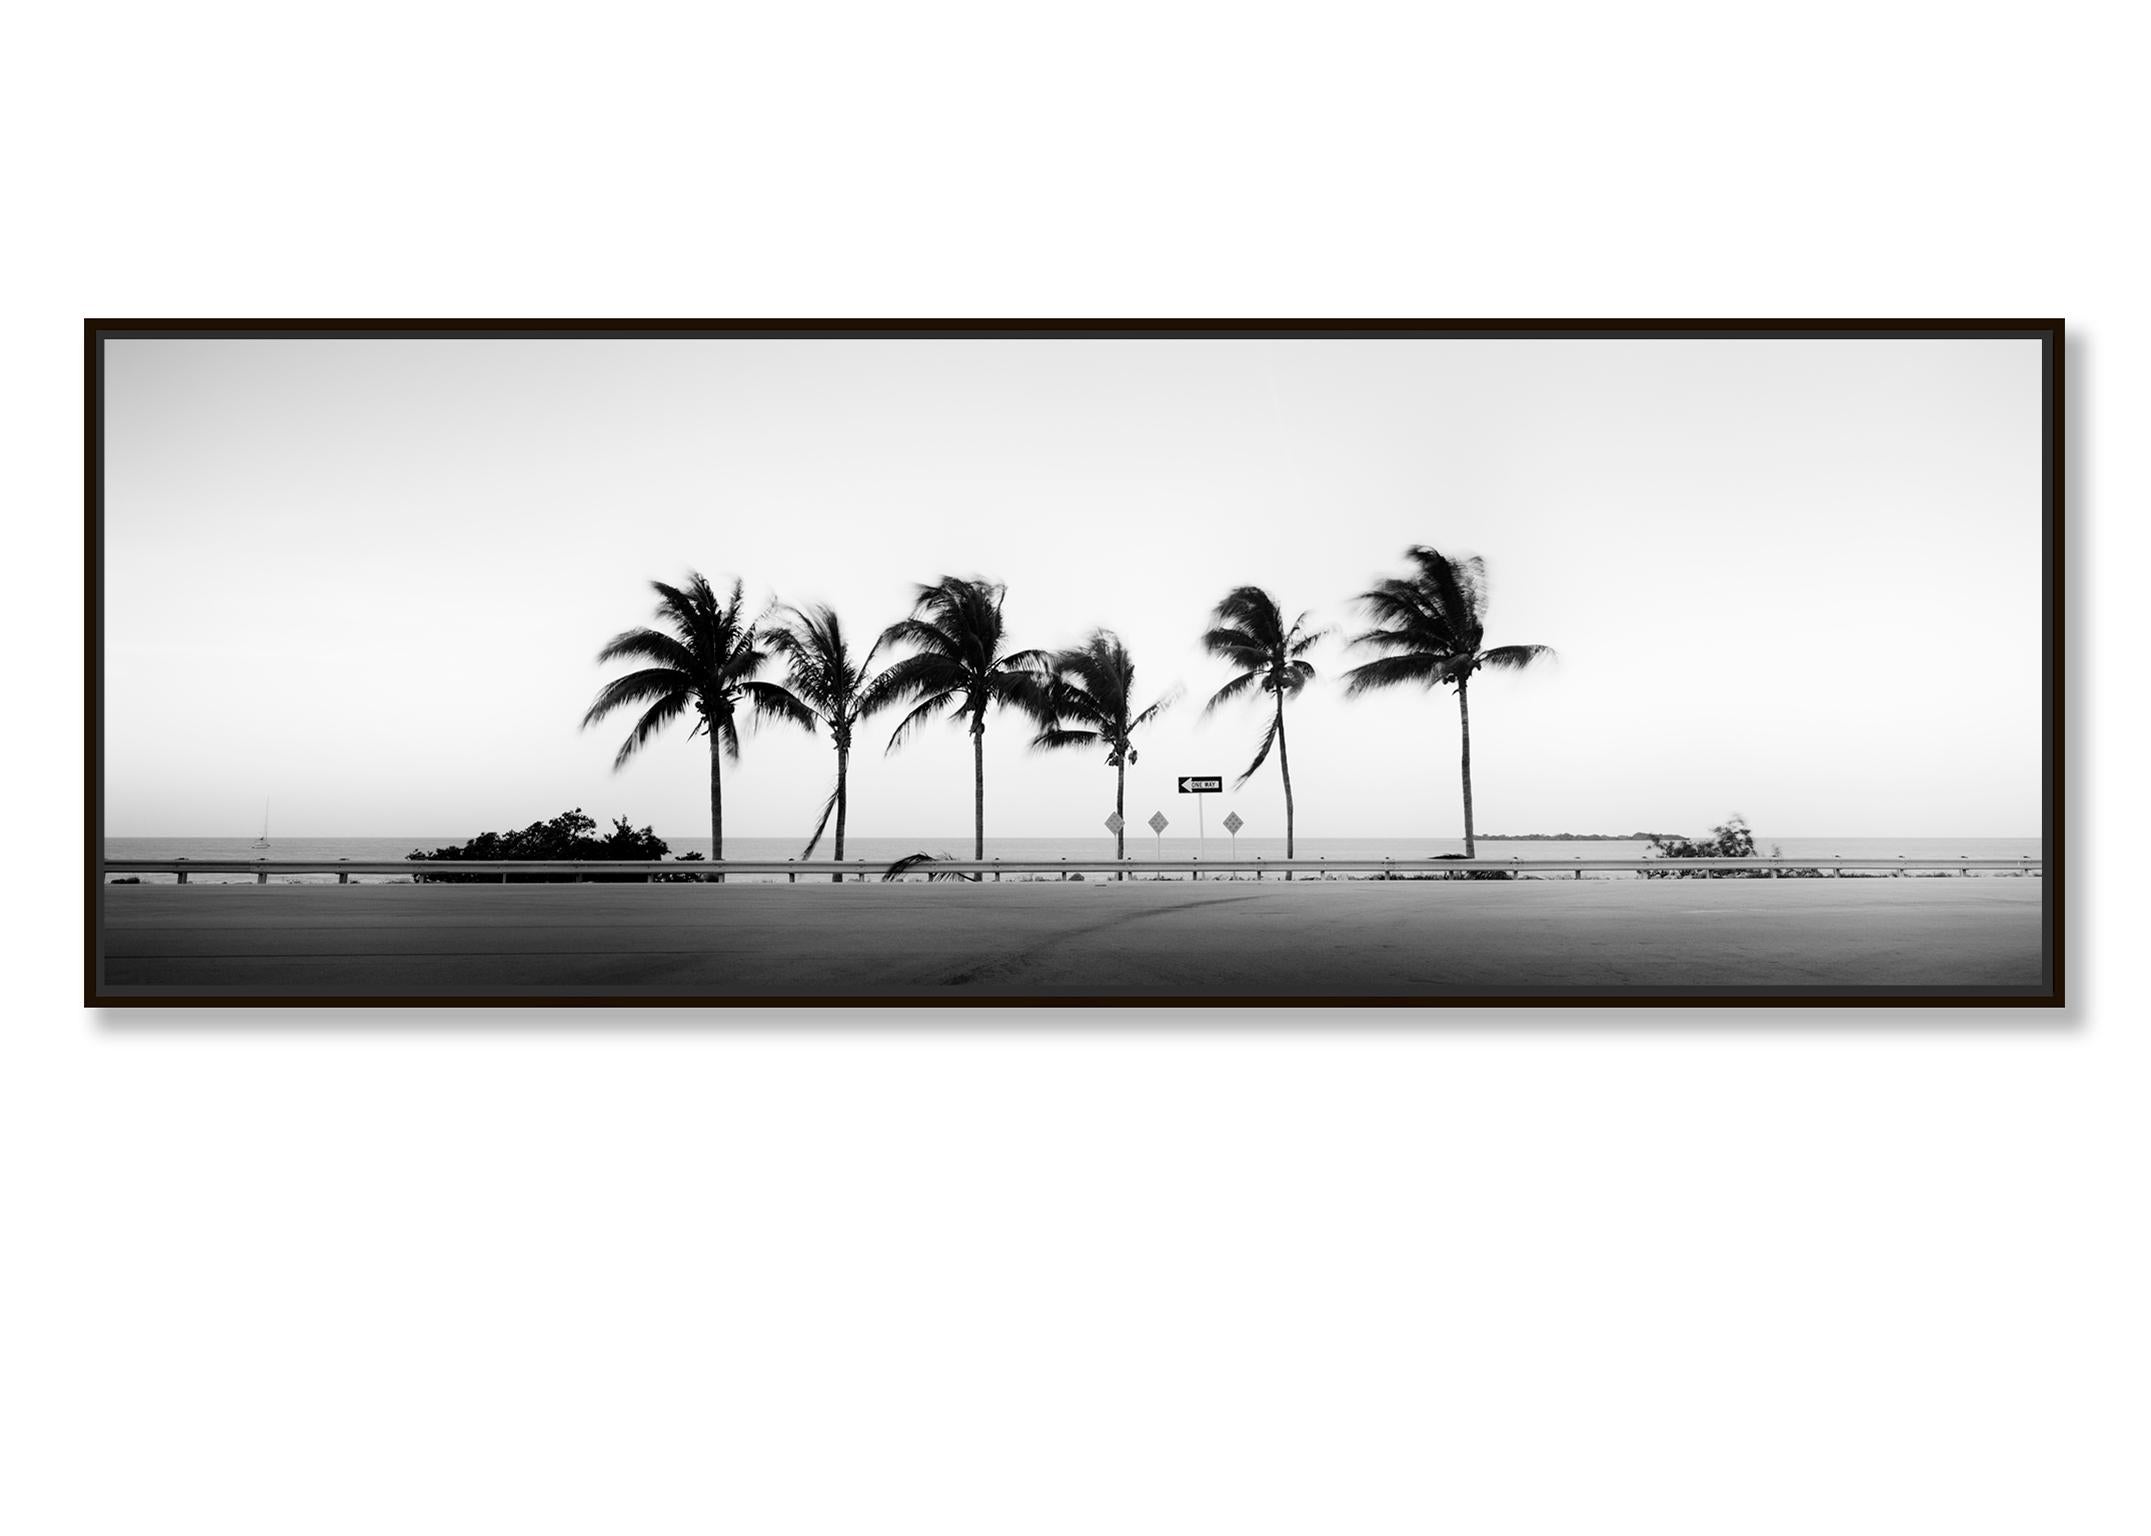 One Way, Panorama, Florida, USA, black and white landscape photography, fine art - Photograph by Gerald Berghammer, Ina Forstinger